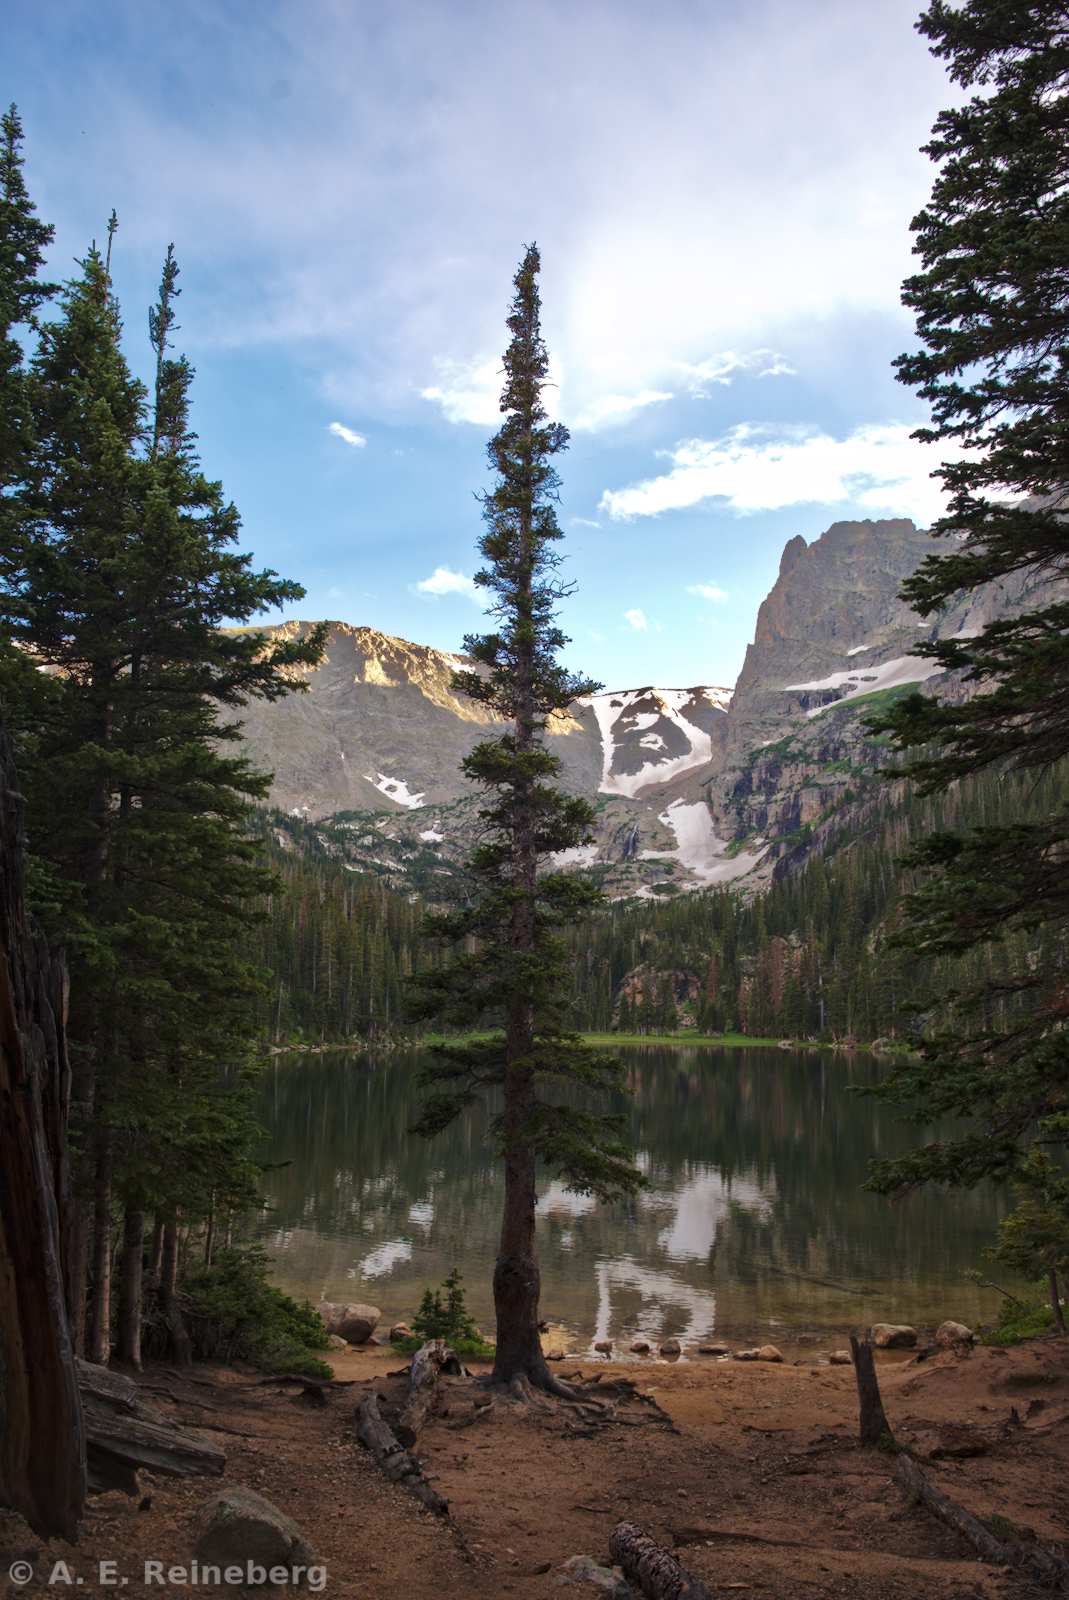 Summer hiking in Rocky Mountain National Park